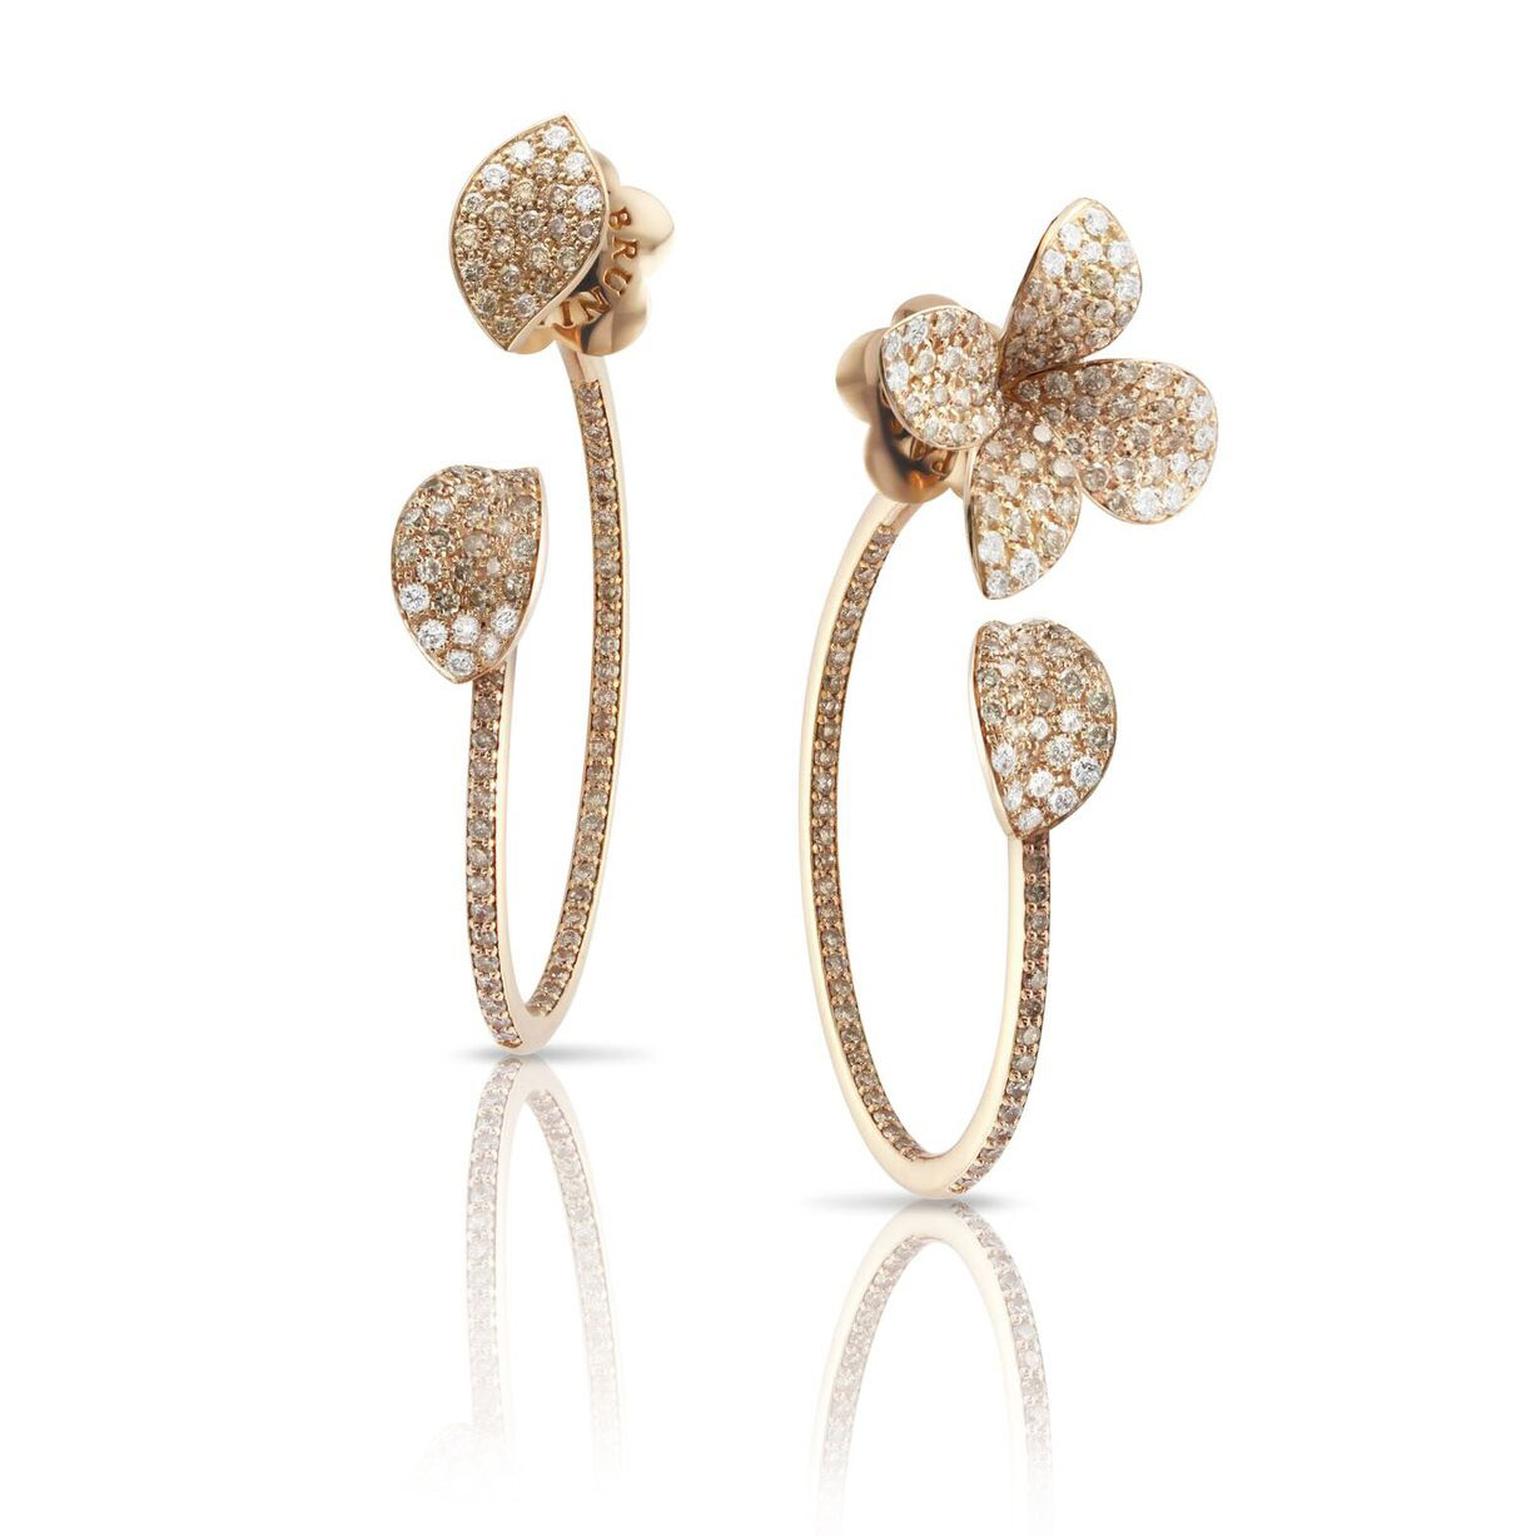 Pasquale Bruni rose gold and diamond earrings